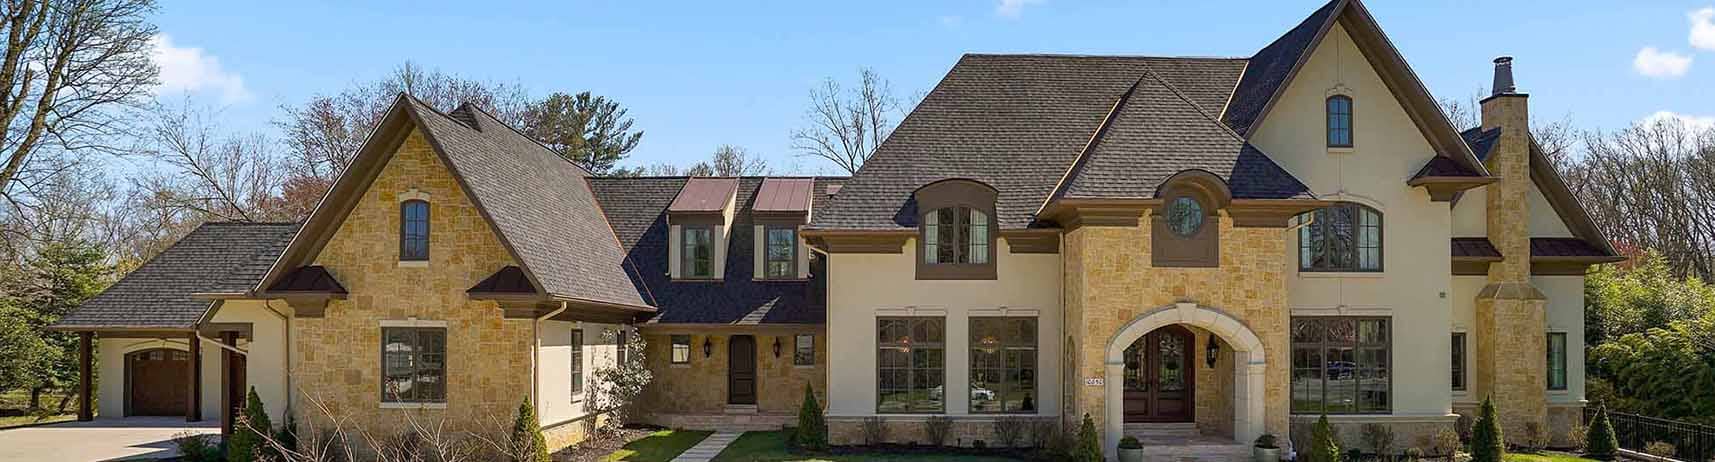 Potomac Home Builder, Custom Home Builder and Home Remodeling Contractor